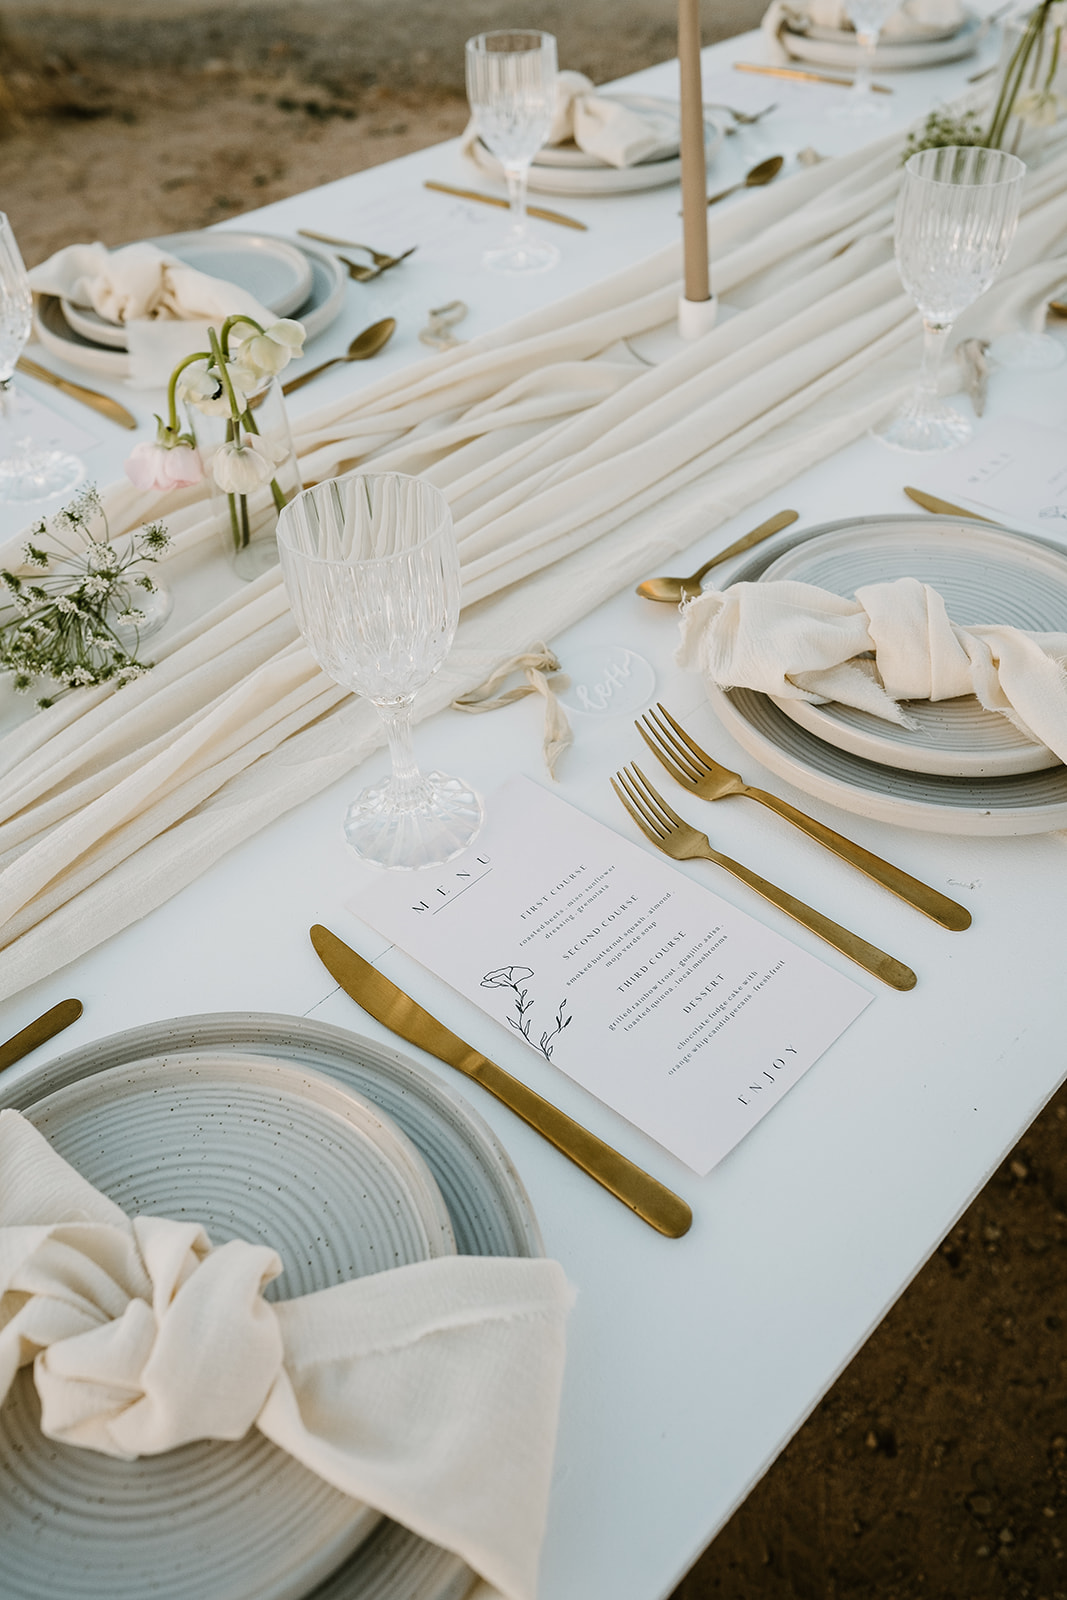 Plates and Utensils for Wedding